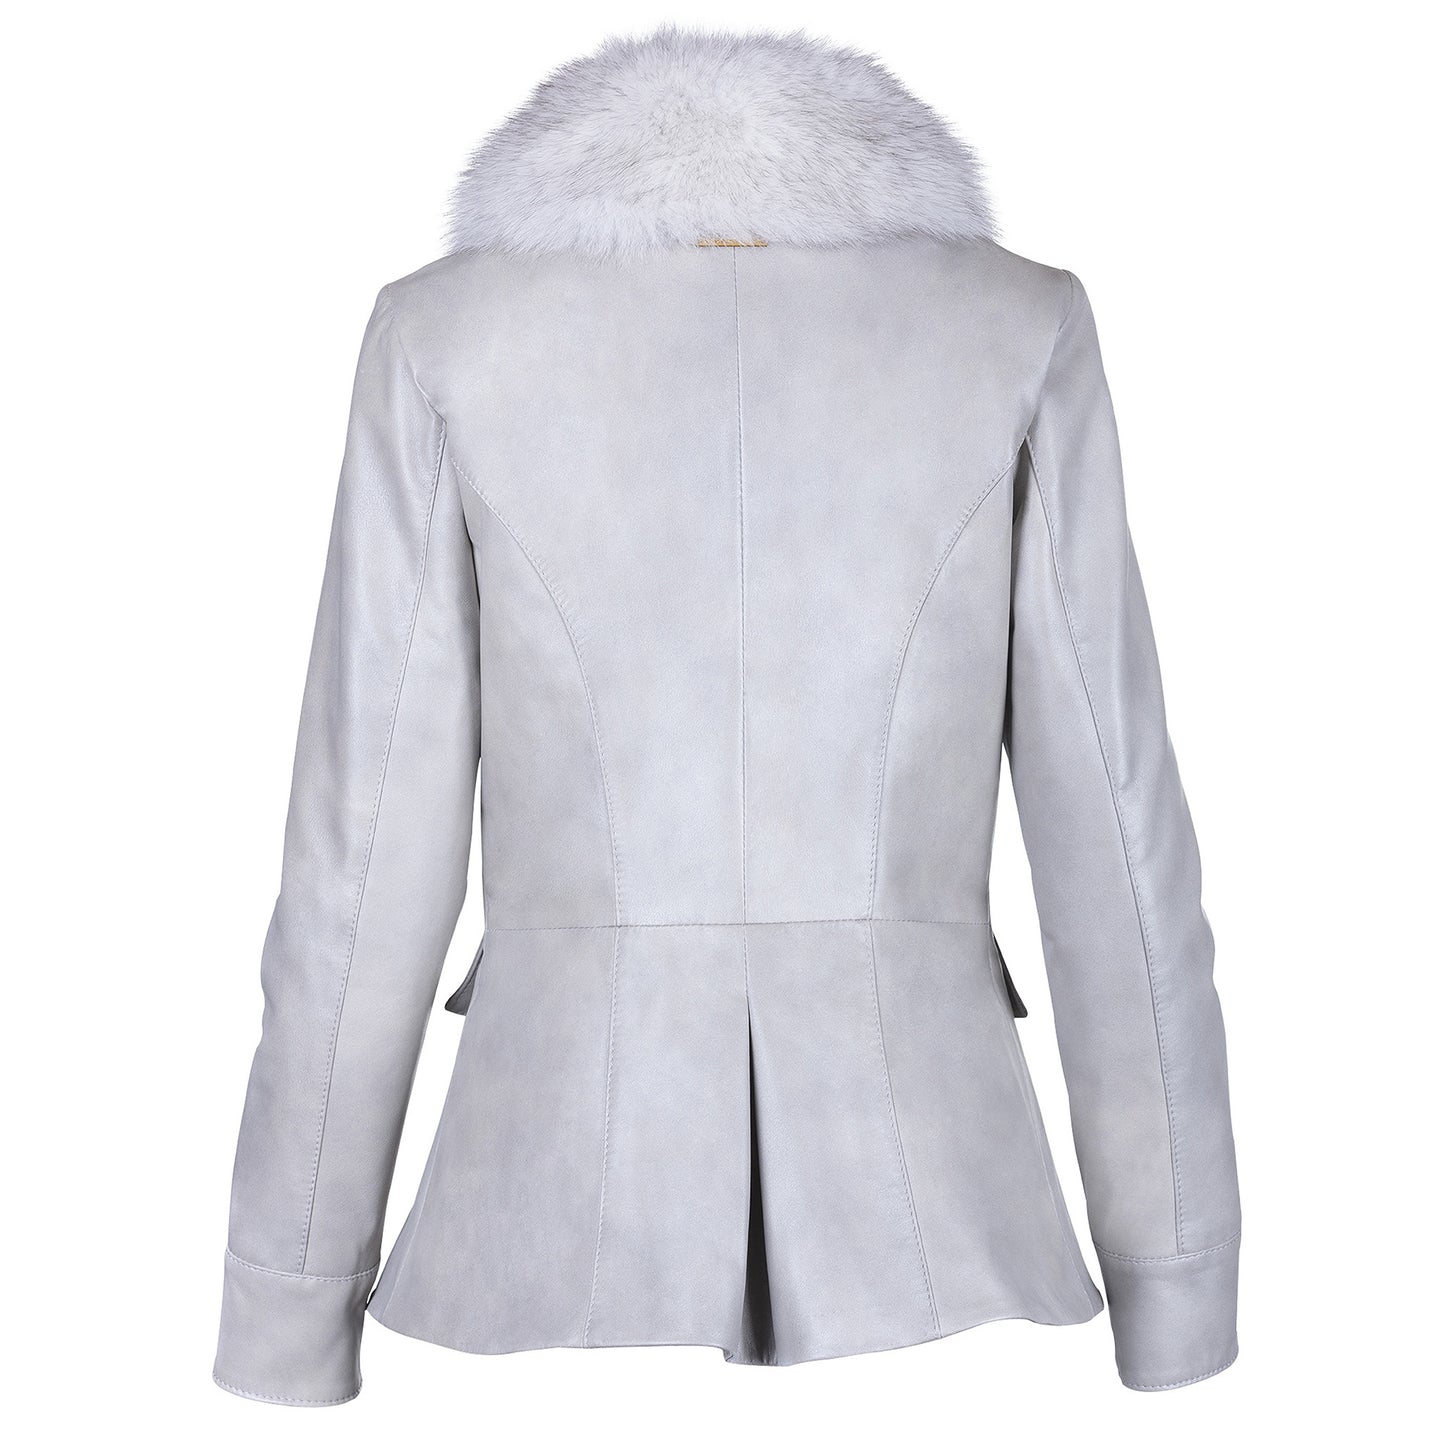 Winter Tailored Fox Collar Reindeer Leather Jacket- Limited Edition